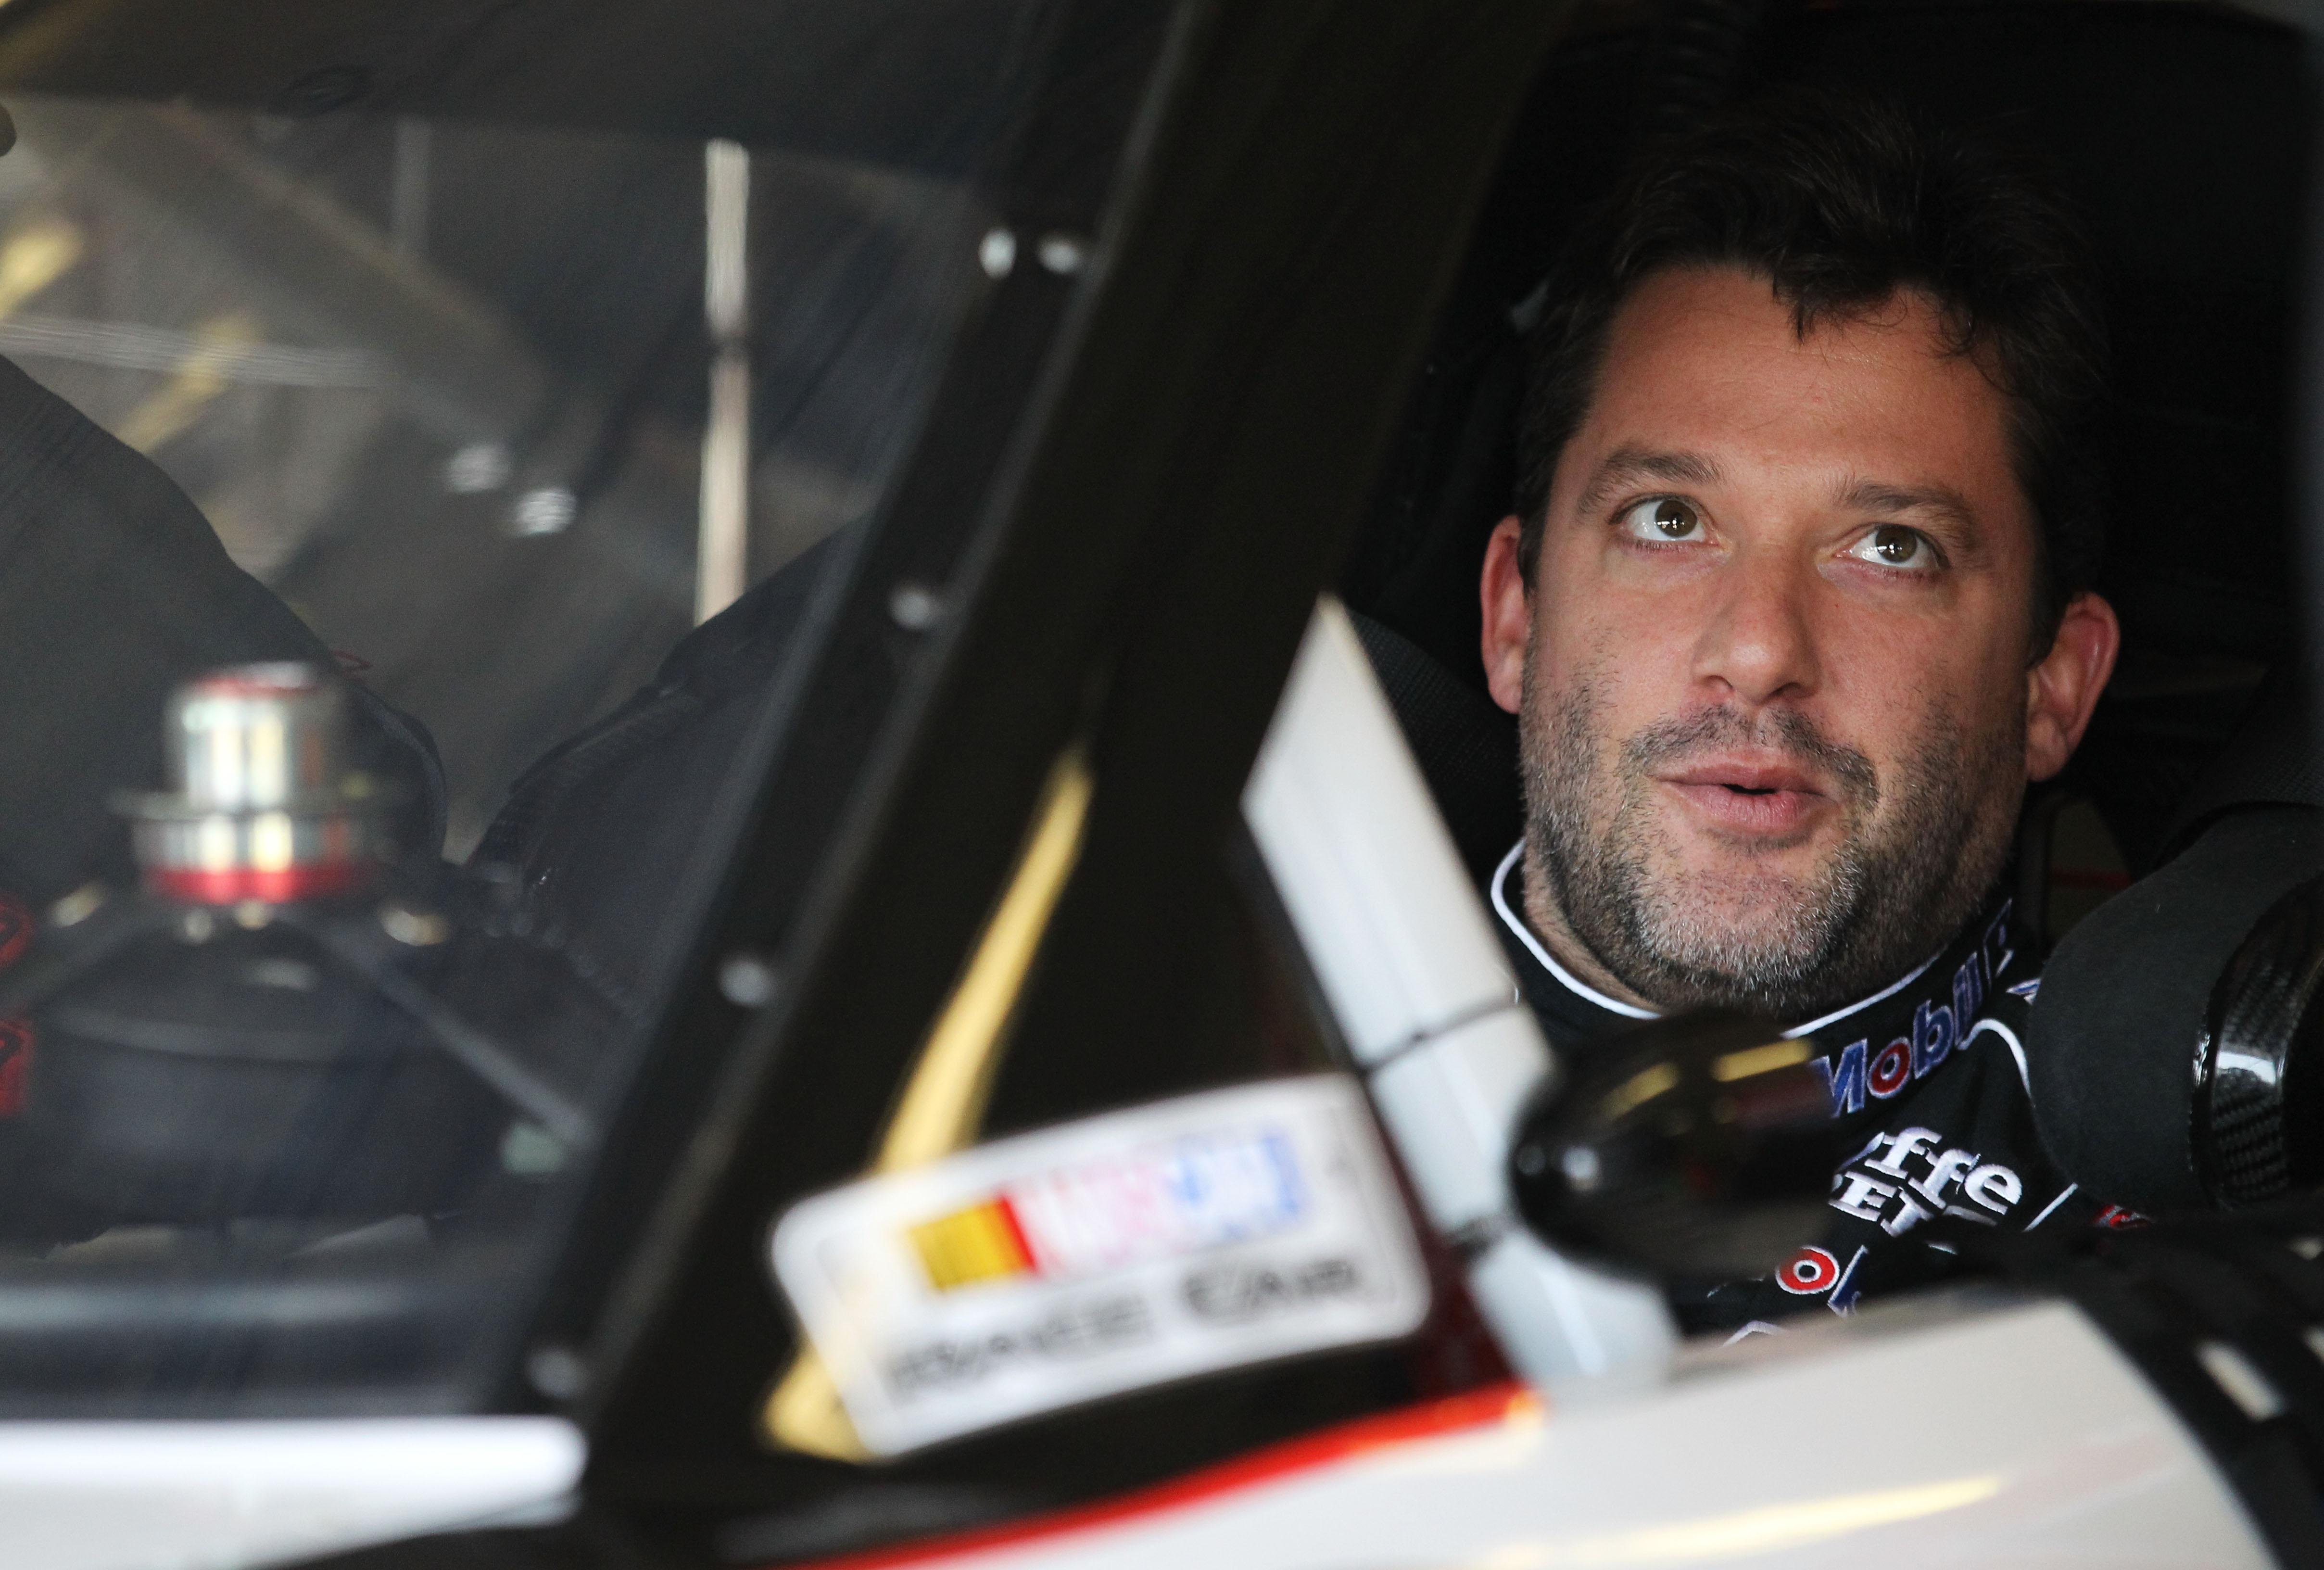 FORT WORTH, TX - APRIL 08:  Tony Stewart, driver of the #14 Mobil 1/Office Depot Chevrolet, sits in his car during practice for the NASCAR Sprint Cup Series Samsung Mobile 500 at Texas Motor Speedway on April 8, 2011 in Fort Worth, Texas.  (Photo by Ronal